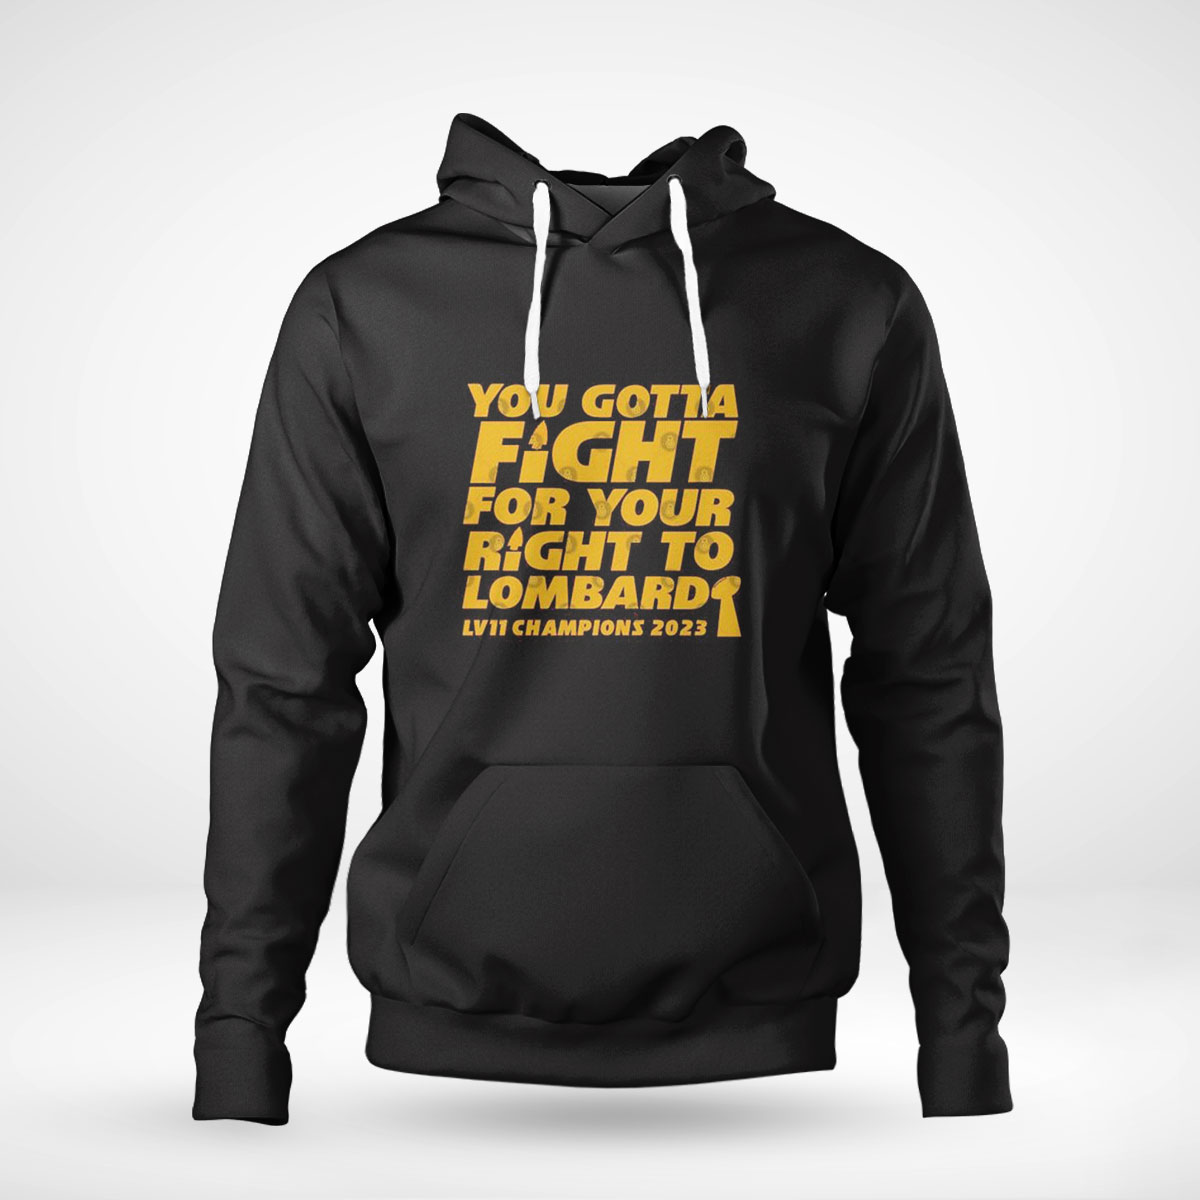 Kansas City Chiefs You Gotta Fight For Your Right To Lombardi 3x Champions Shirt